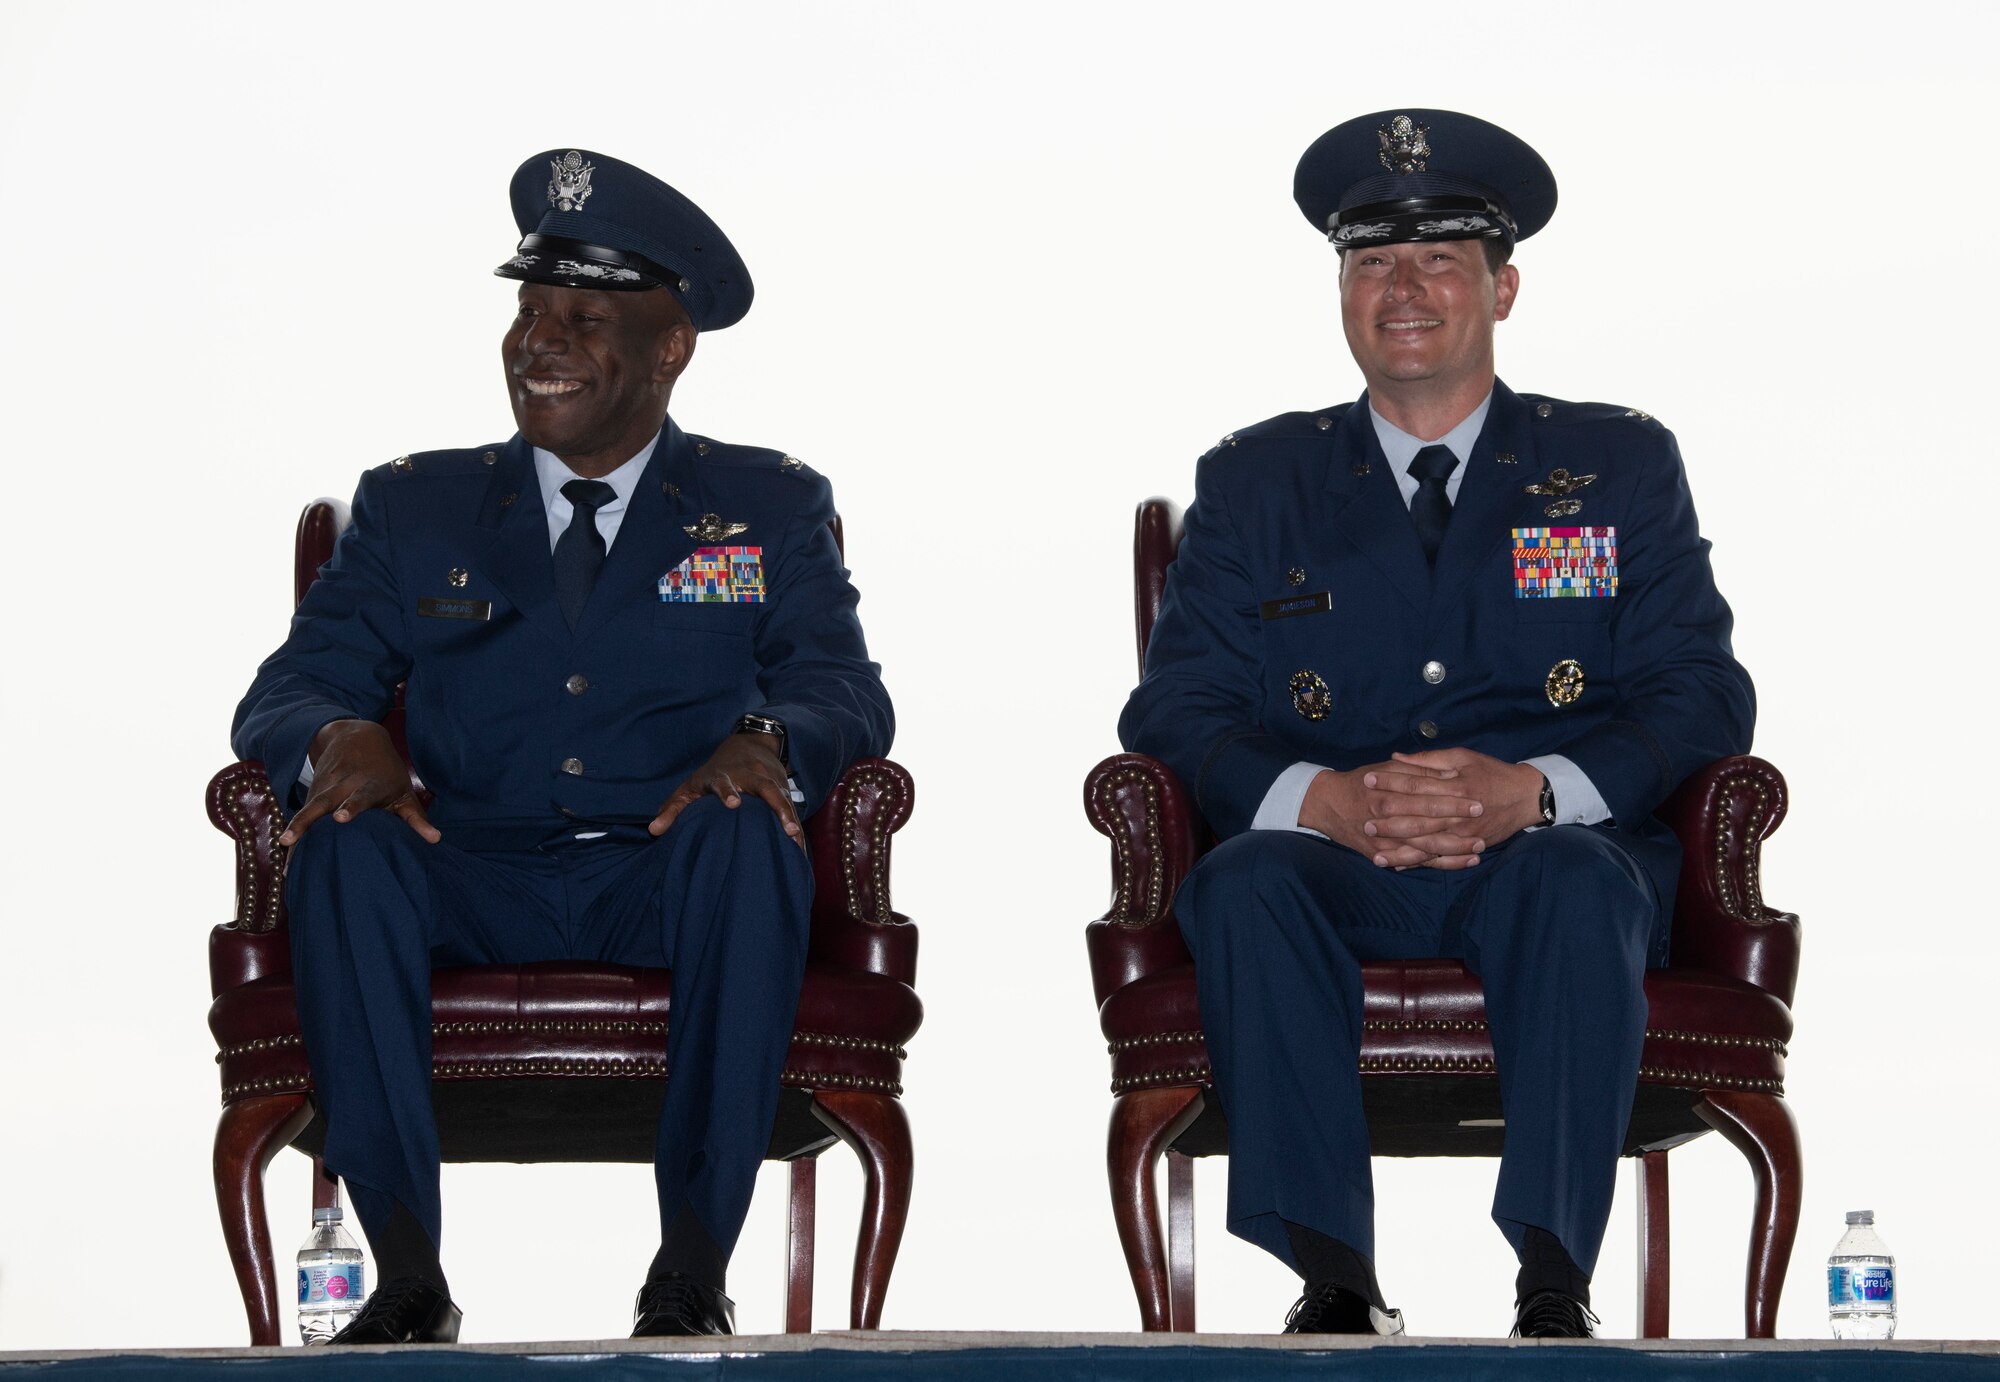 U.S. Air Force Col. Travolis A. Simmons and Col. Kevin M. Jamieson share a moment of levity while sitting on stage